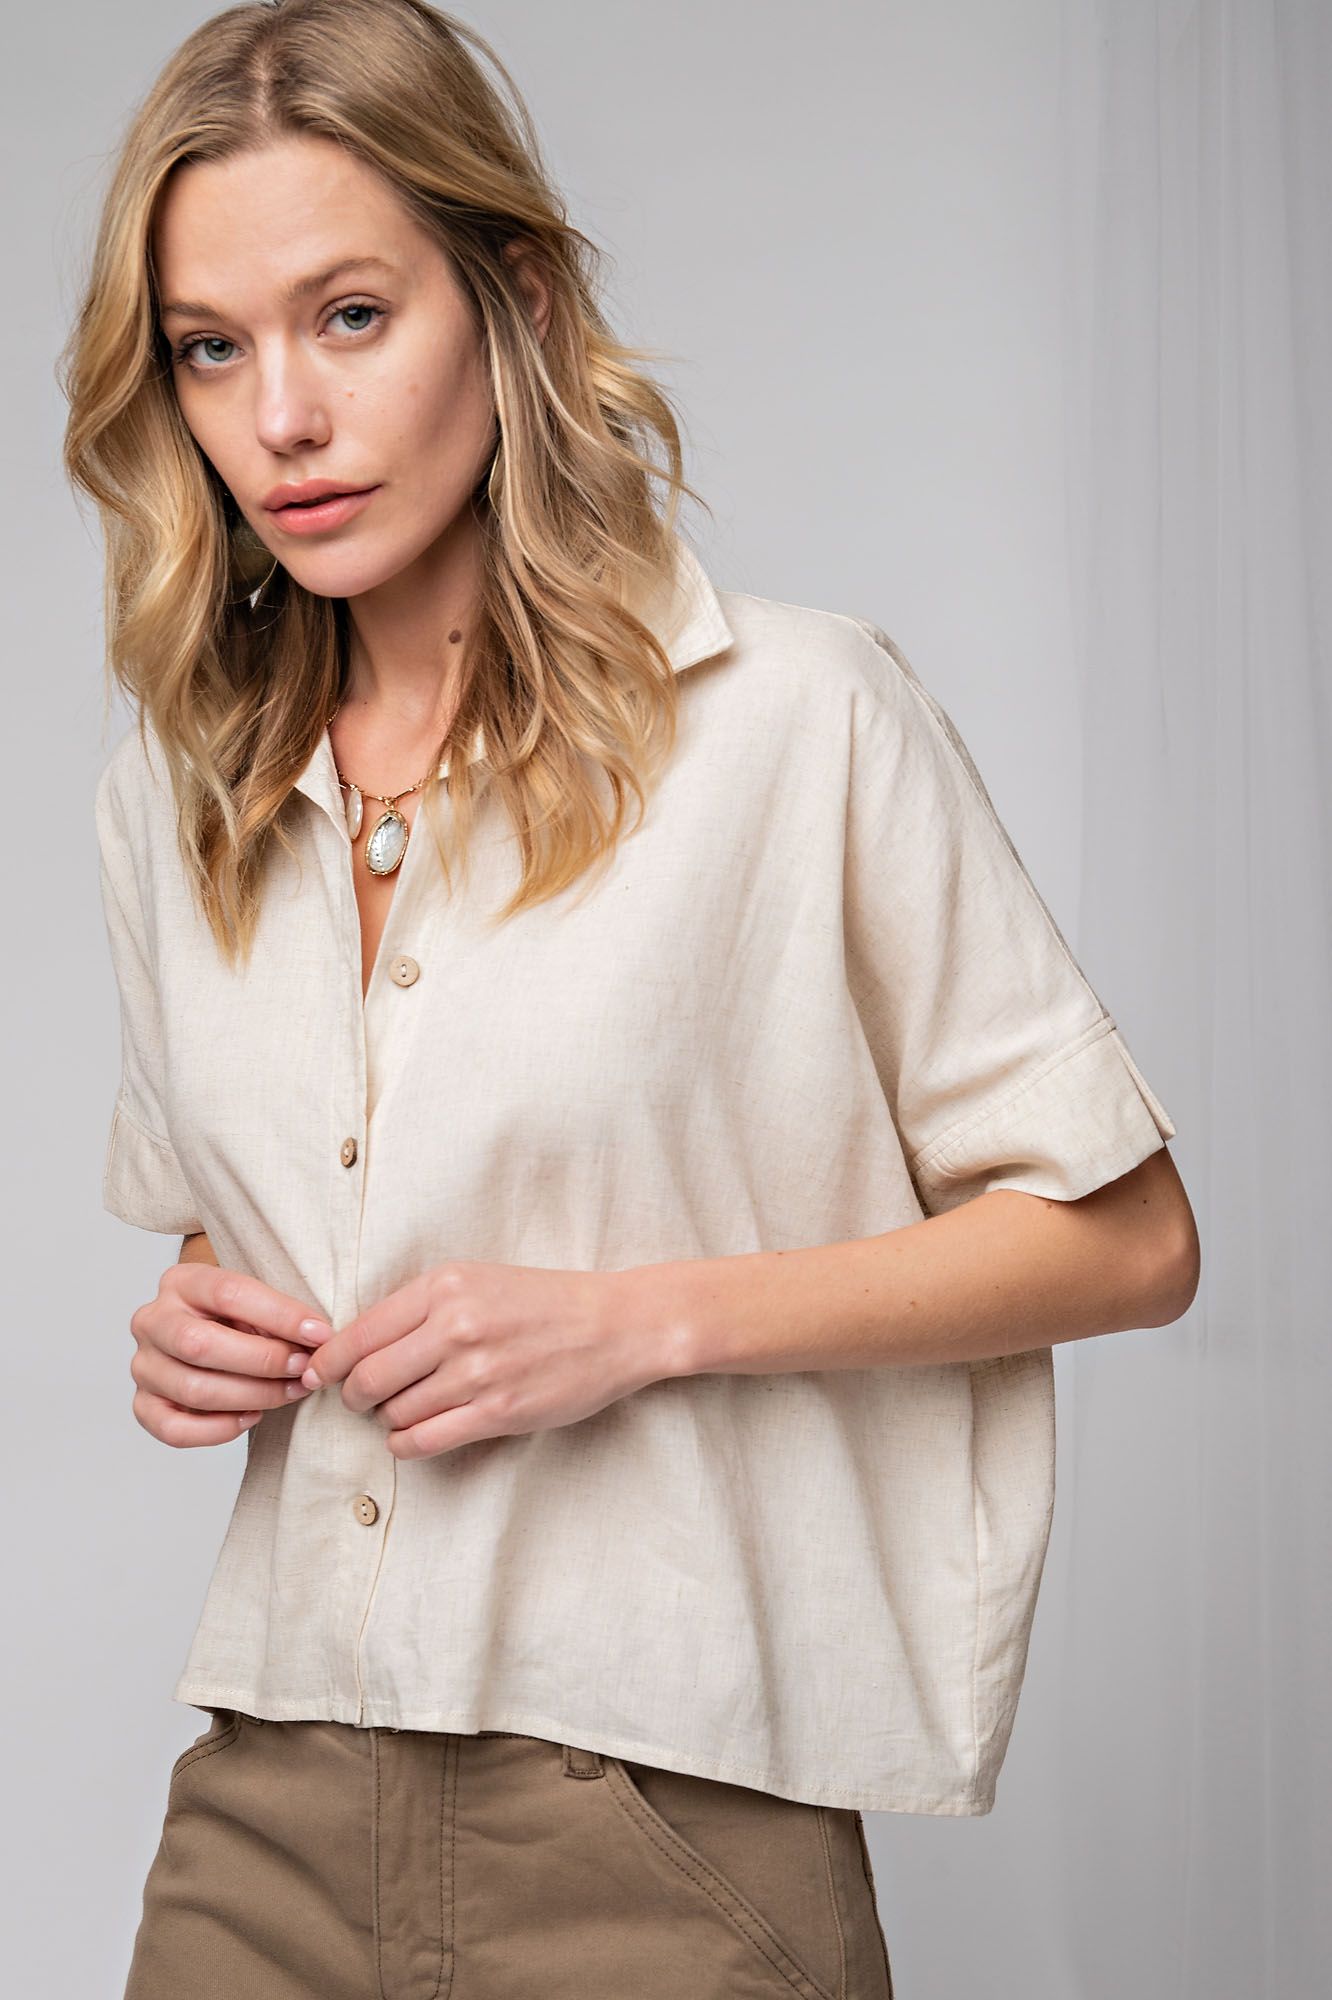 Easel Plus Collared Poly Linen Button Down Shirt Tops